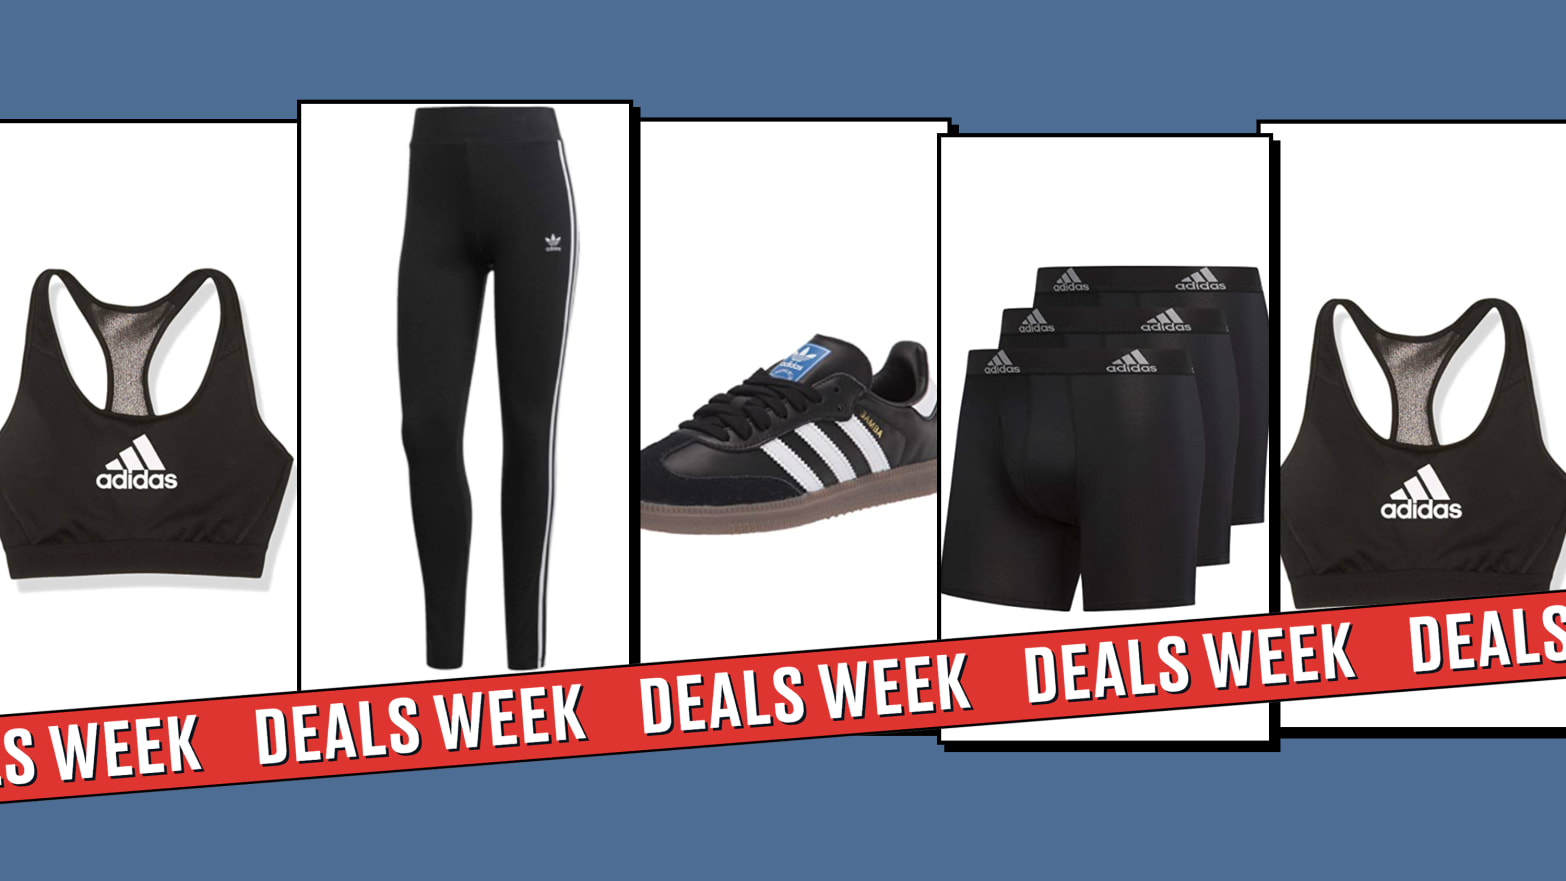 black friday deals on adidas shoes